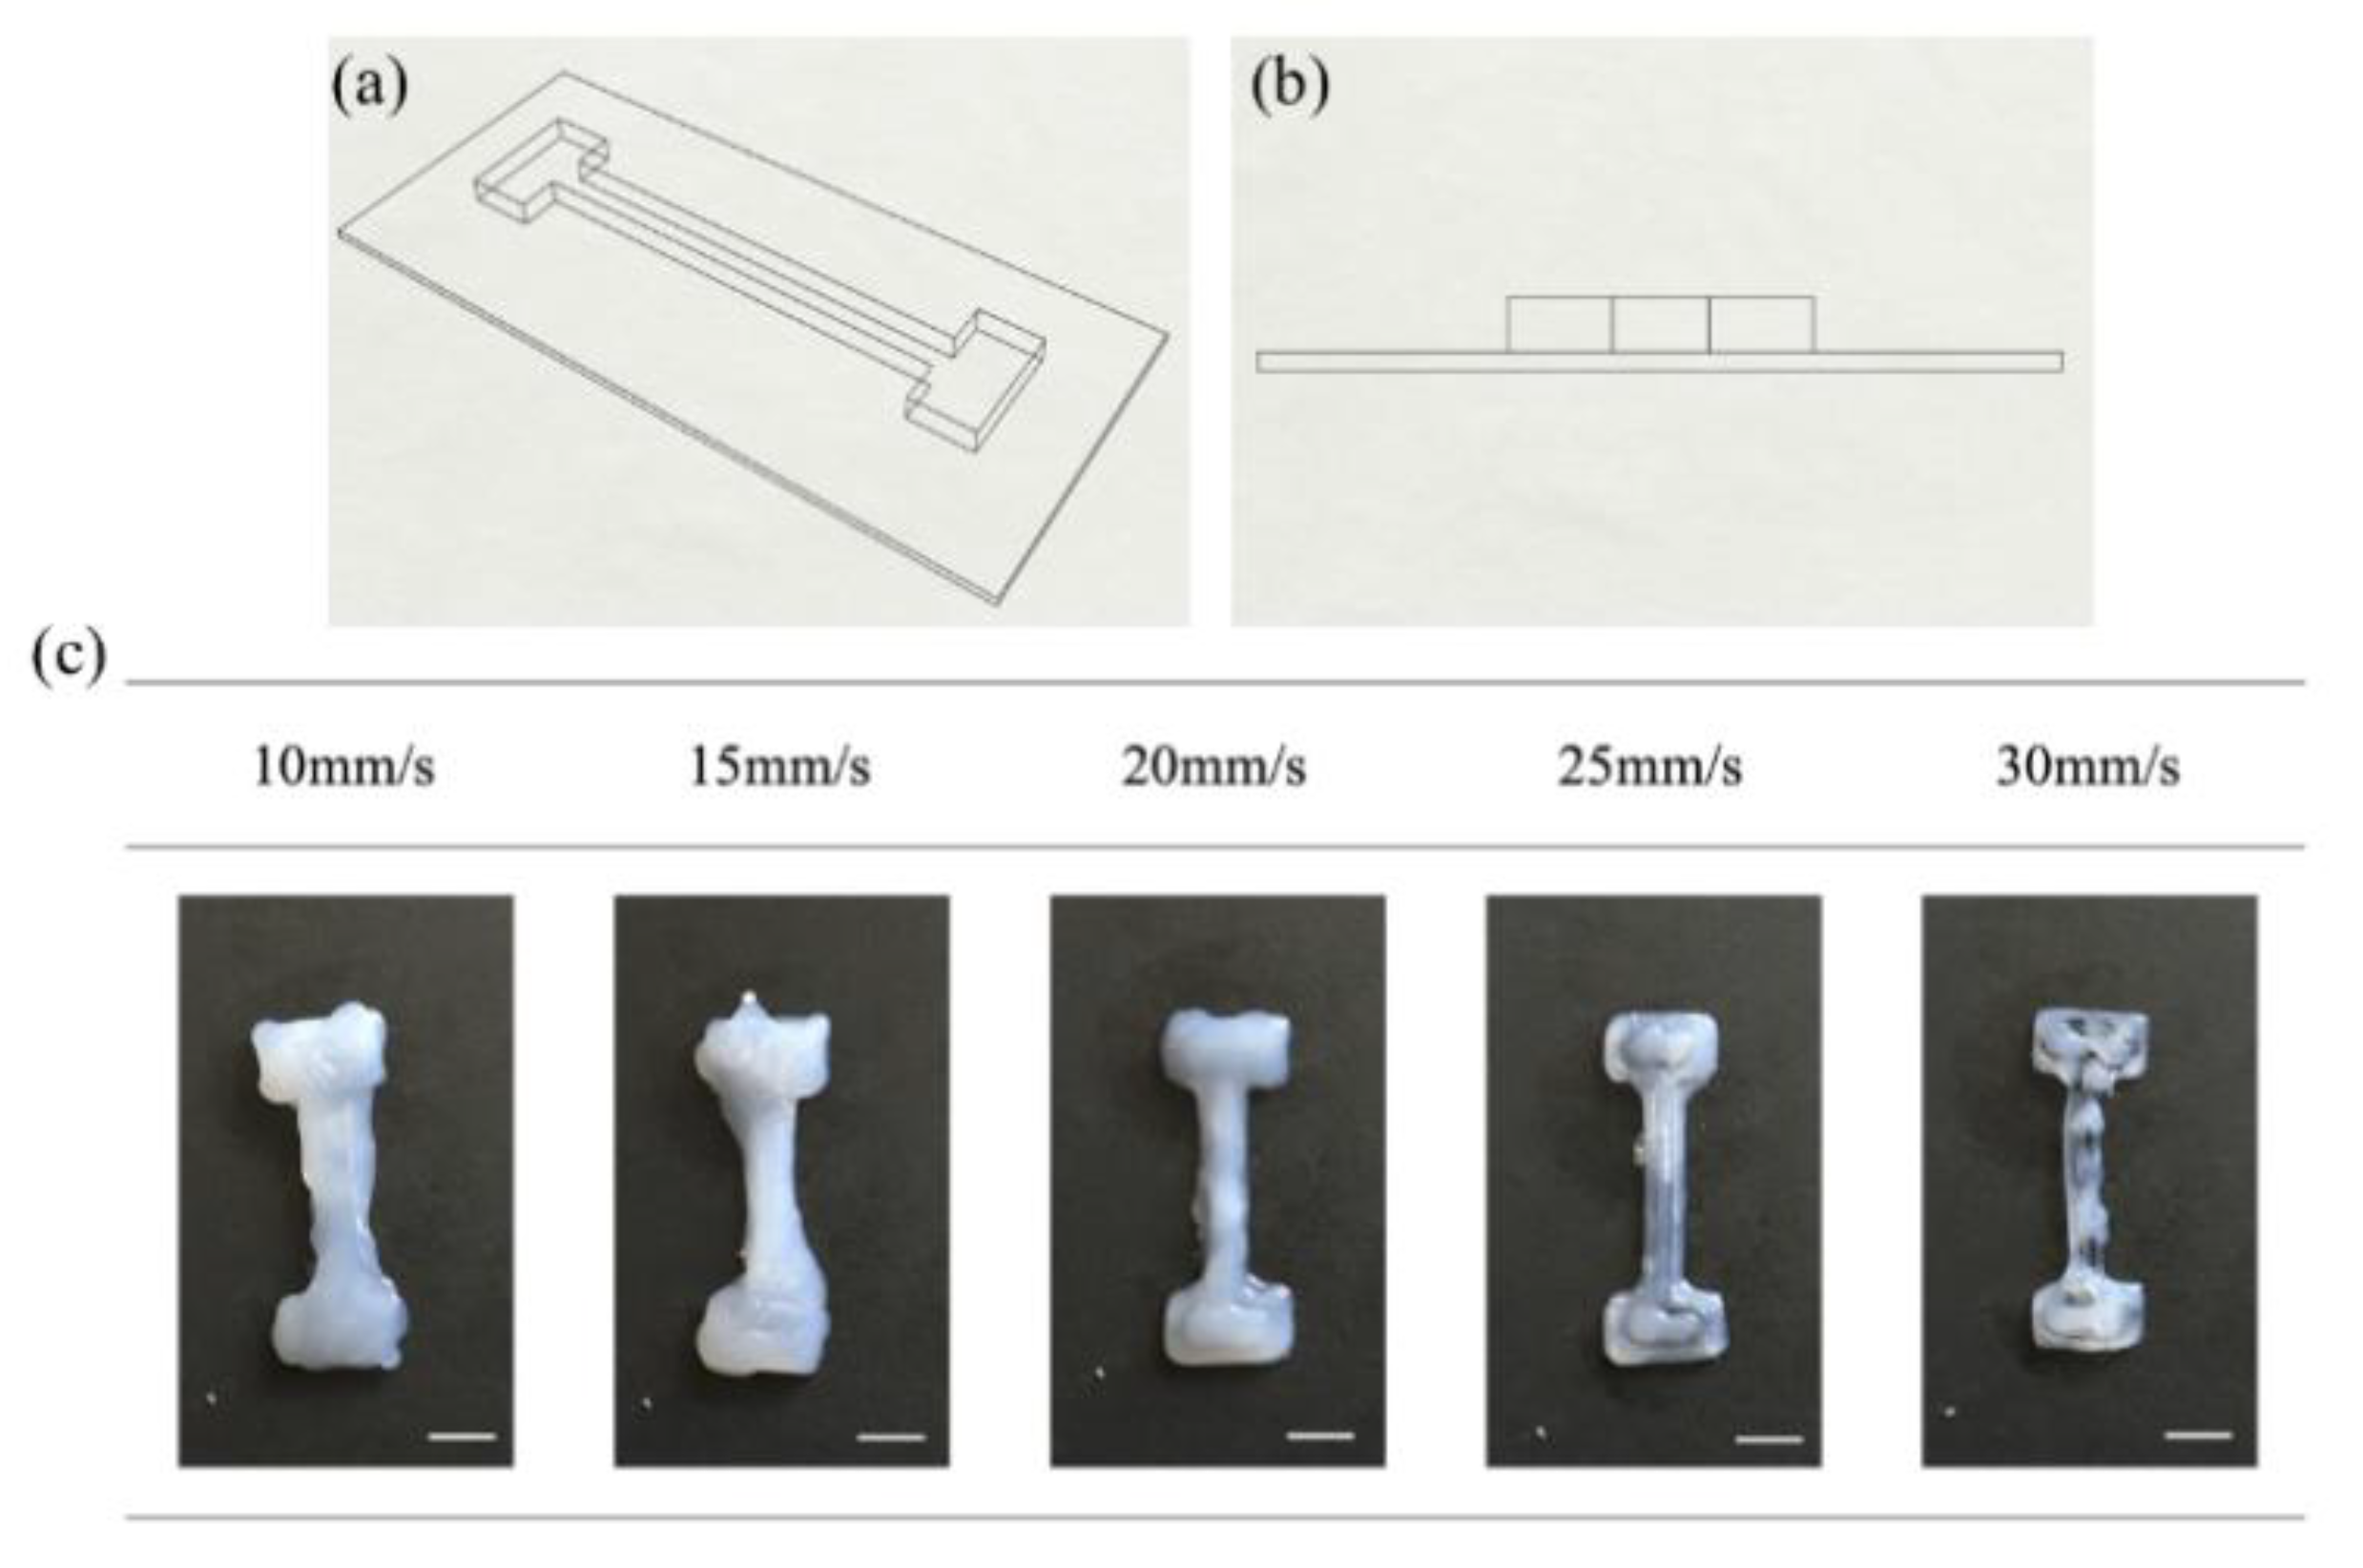 Polymers Free Full Text 3d Direct Printing Of Silicone Meniscus Implant Using A Novel Heat Cured Extrusion Based Printer Html